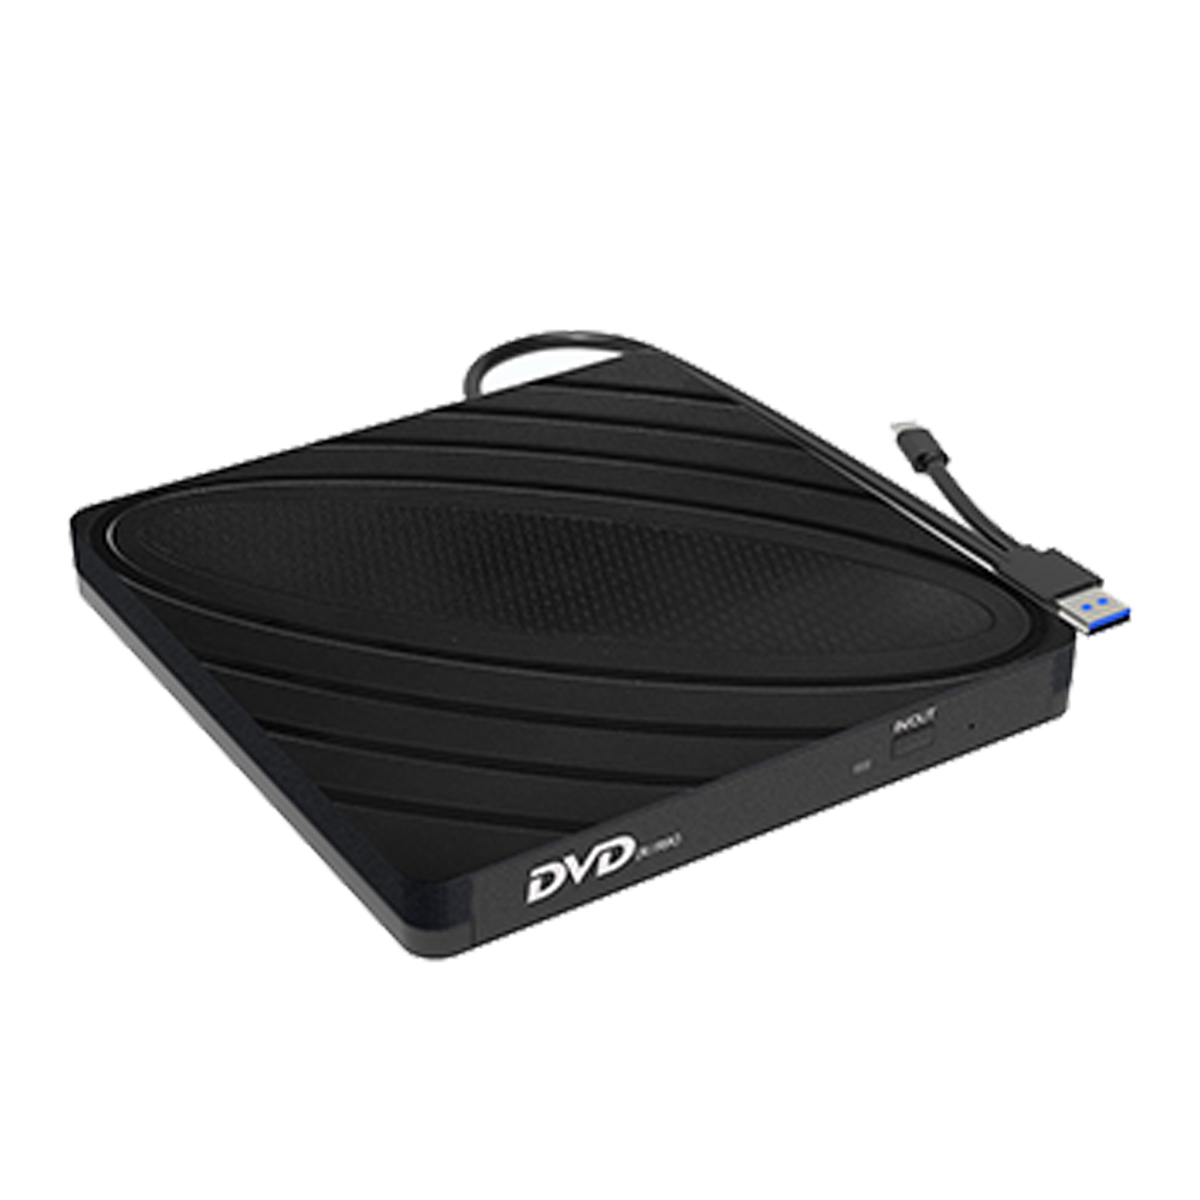 Find USB3.0 Type-C External CD DVD Optical Drive High Speed Data Transfer External DVD-RW Player External Burner Writer Rewriter for Computer PC Laptop XD0065 for Sale on Gipsybee.com with cryptocurrencies